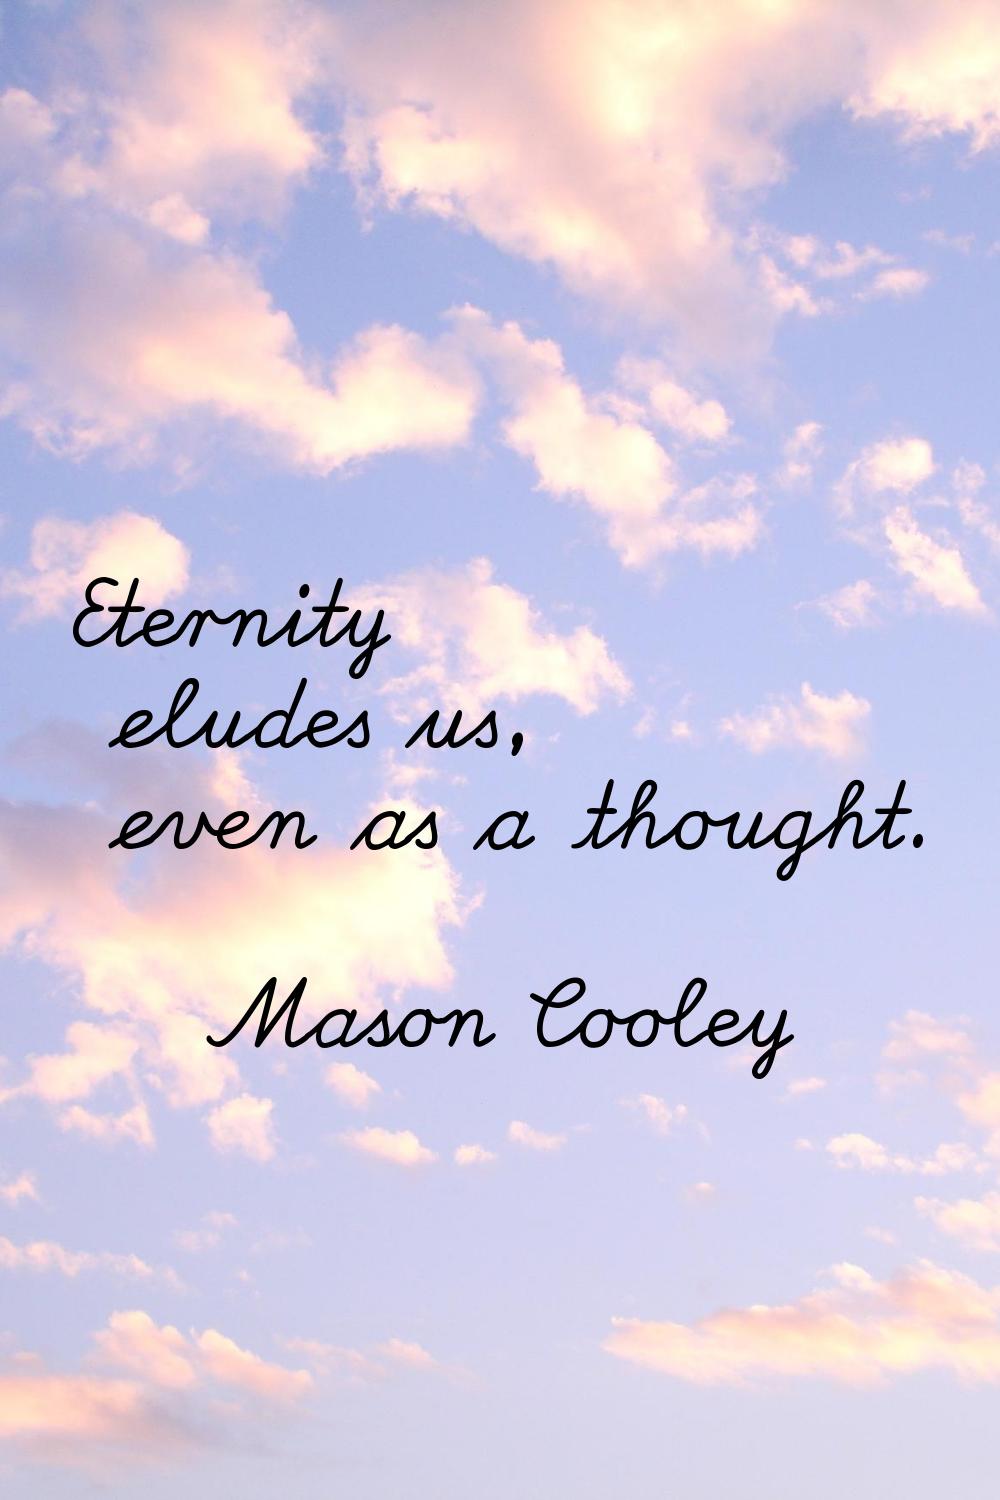 Eternity eludes us, even as a thought.